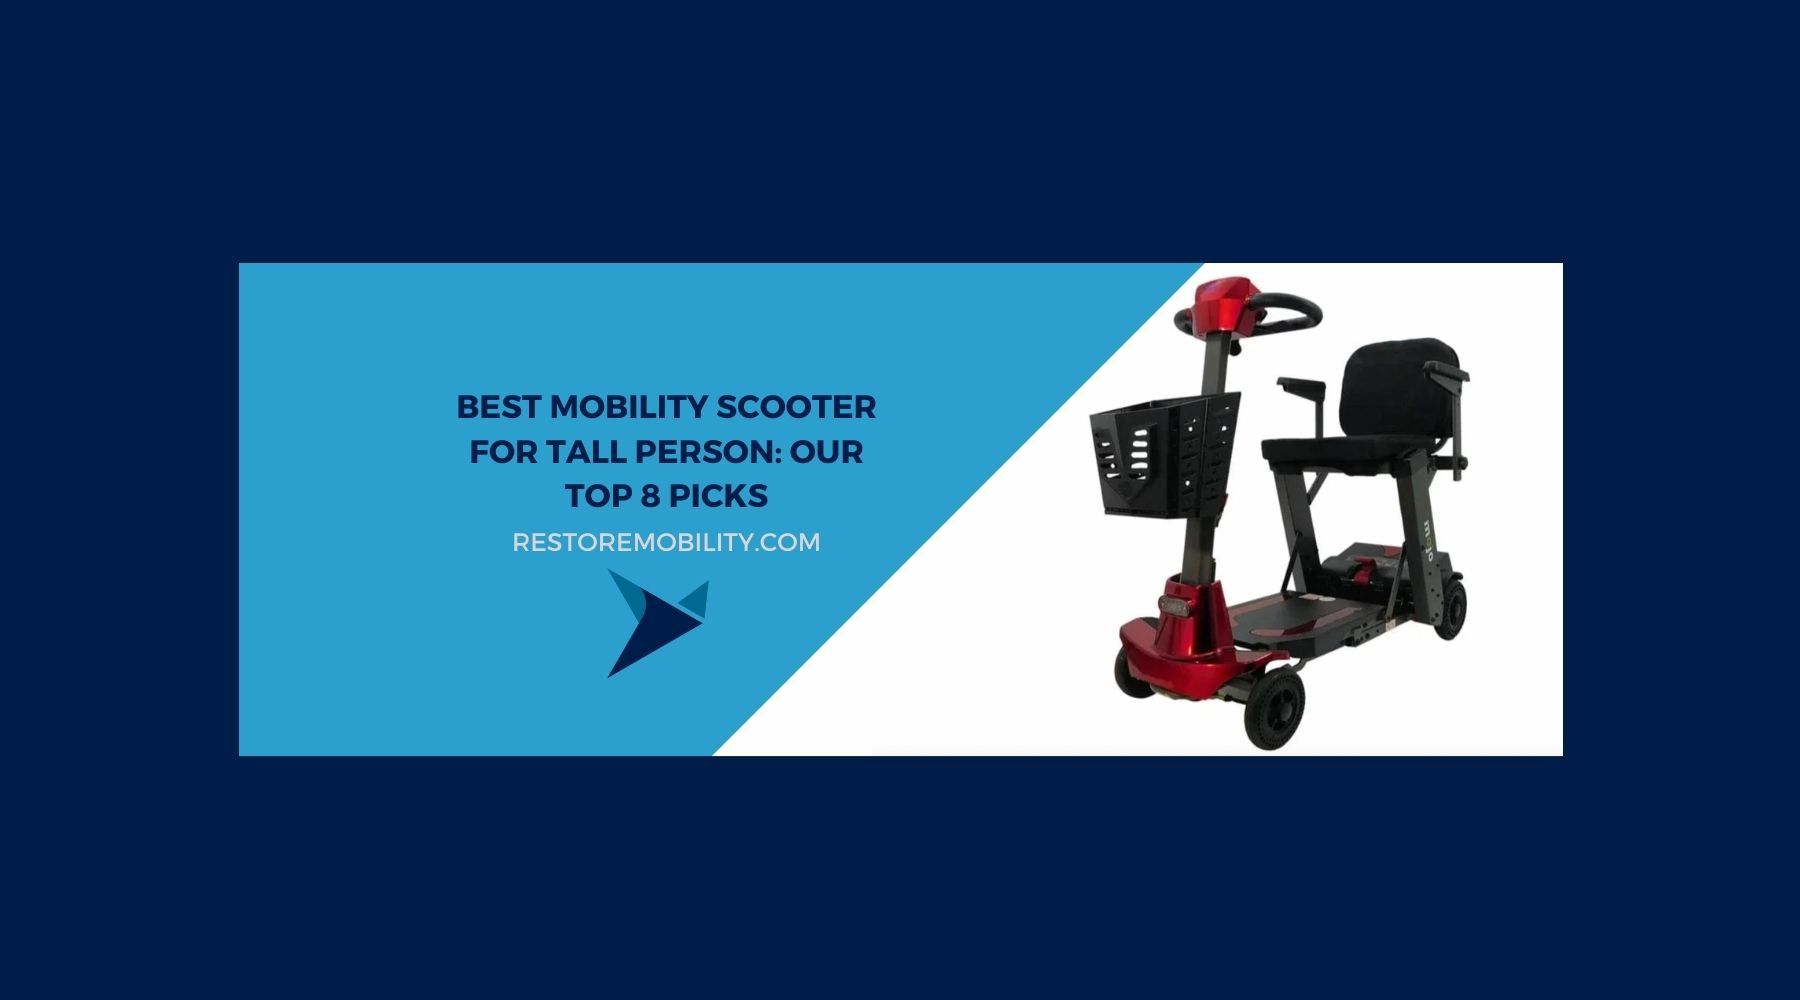 Best Mobility Scooter for Tall Person: Our Top 8 Picks